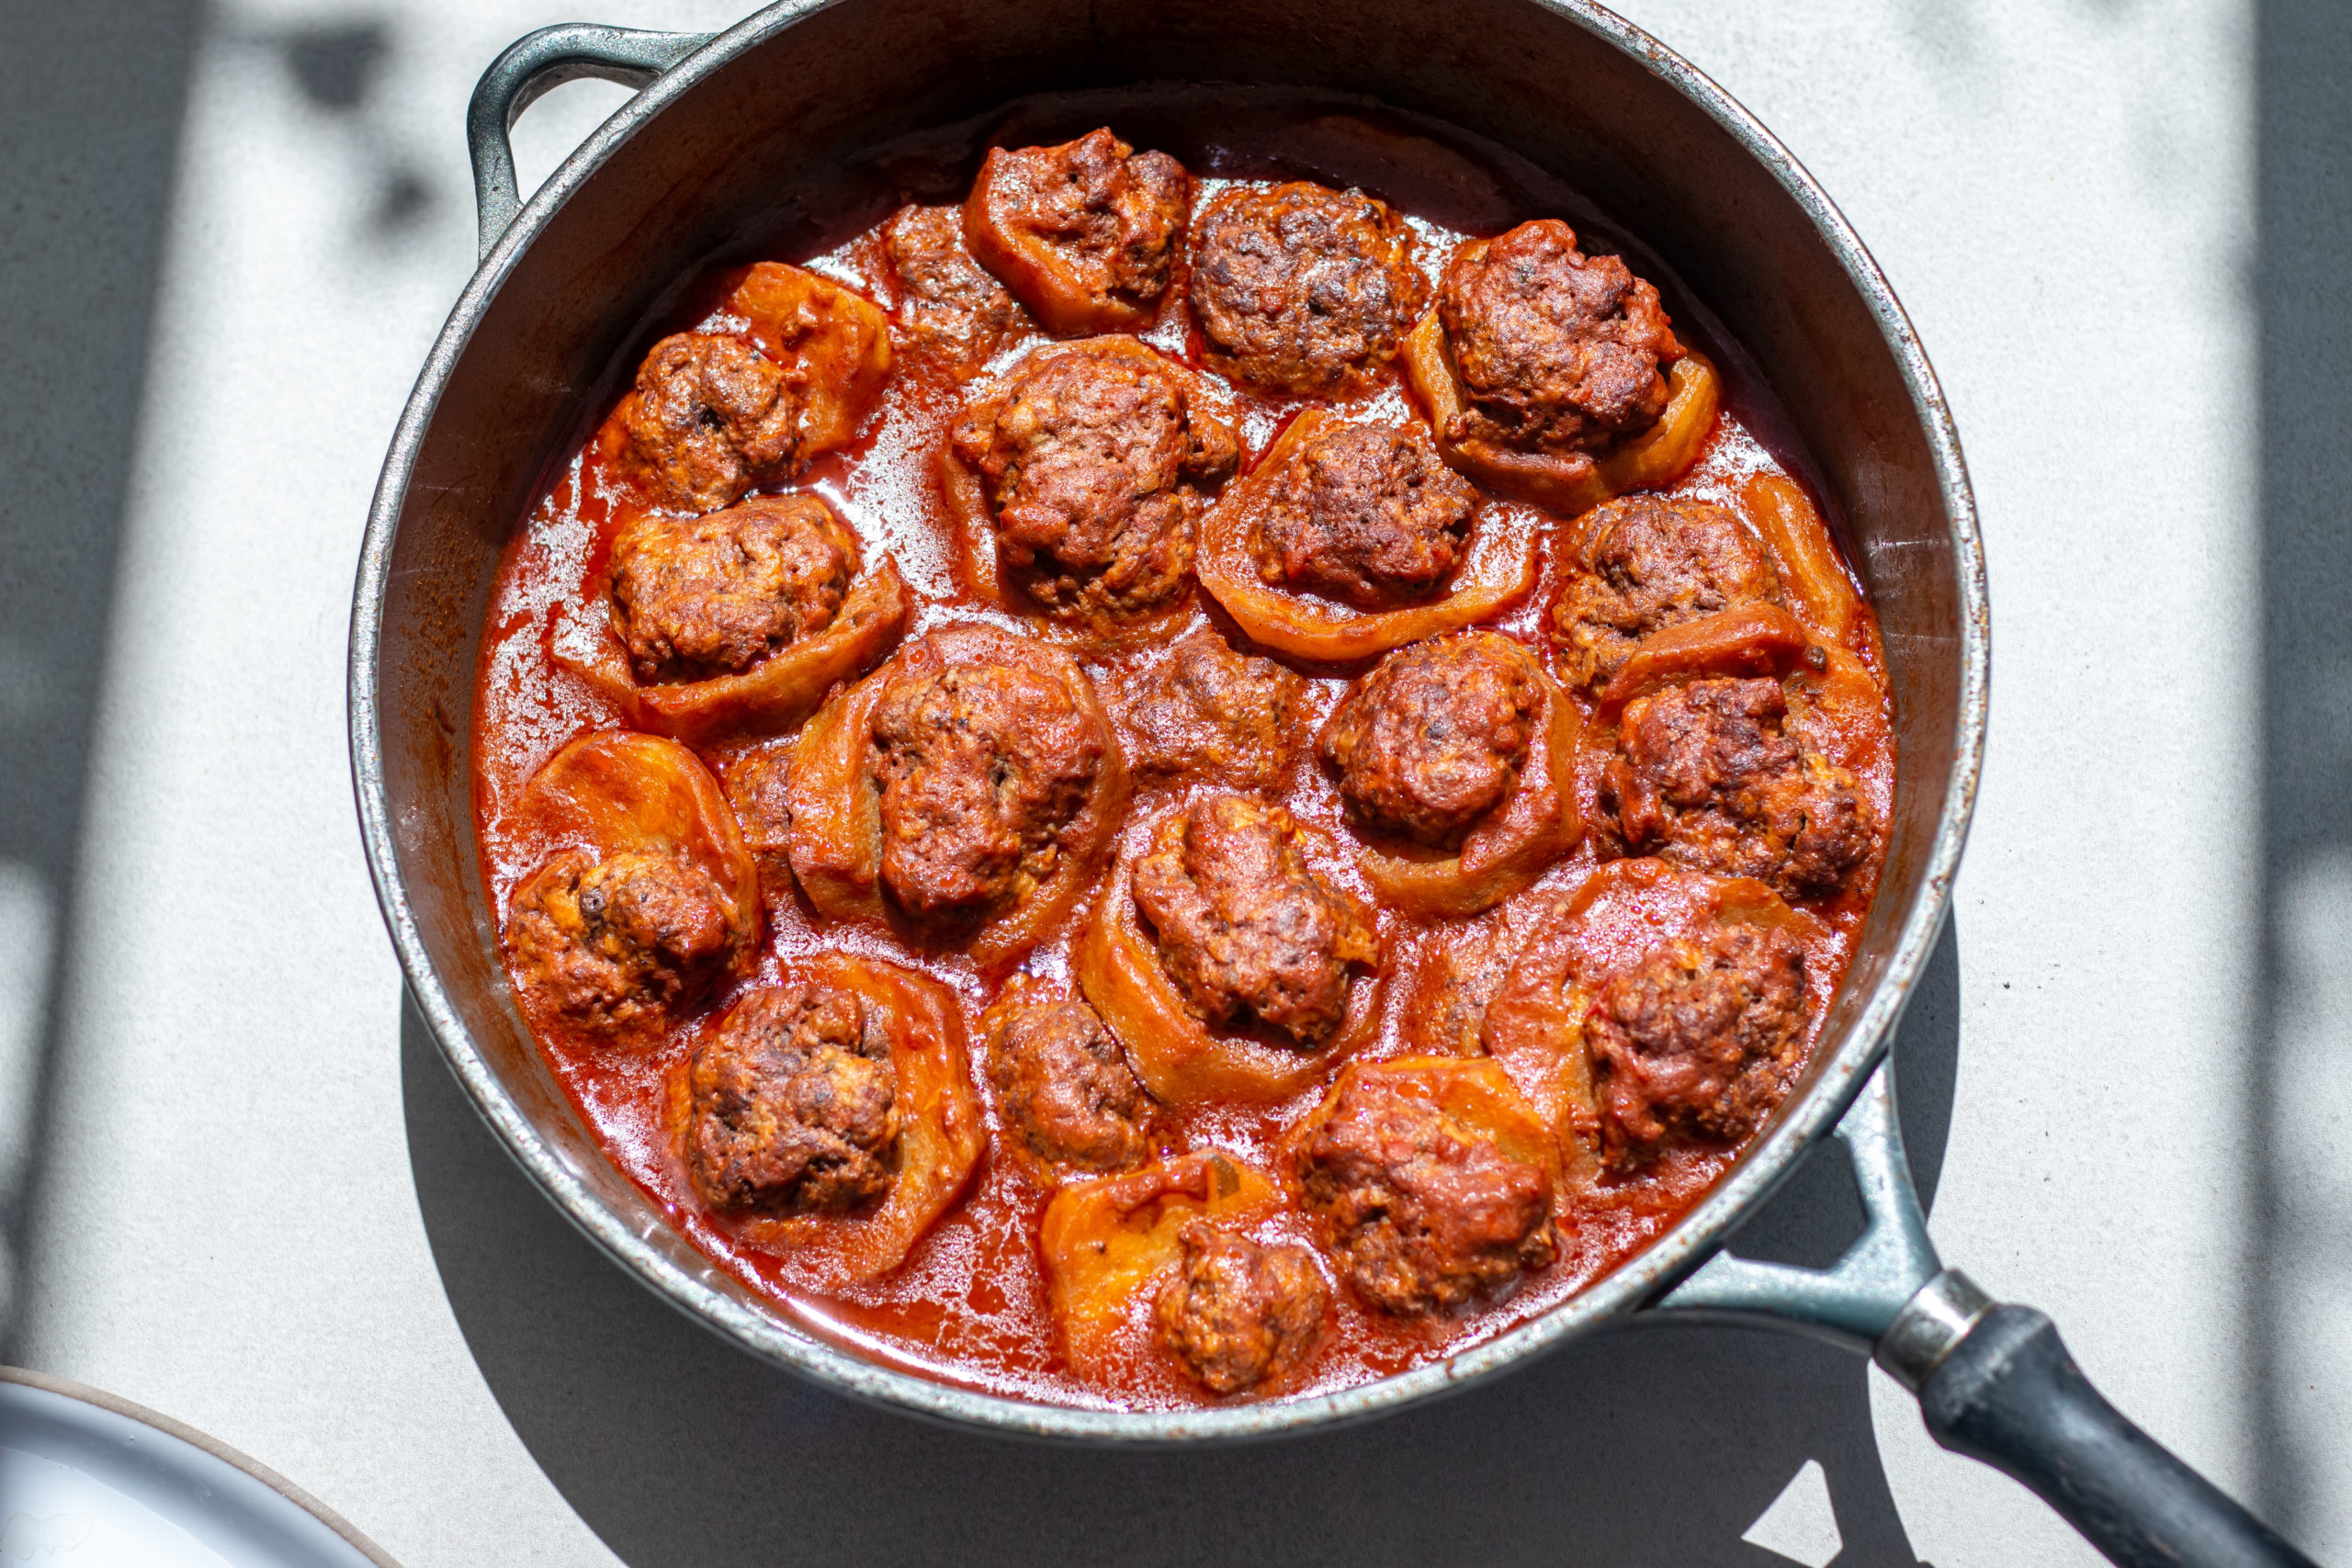 A pot of beef-stuffed eggplant called medias in tomato sauce